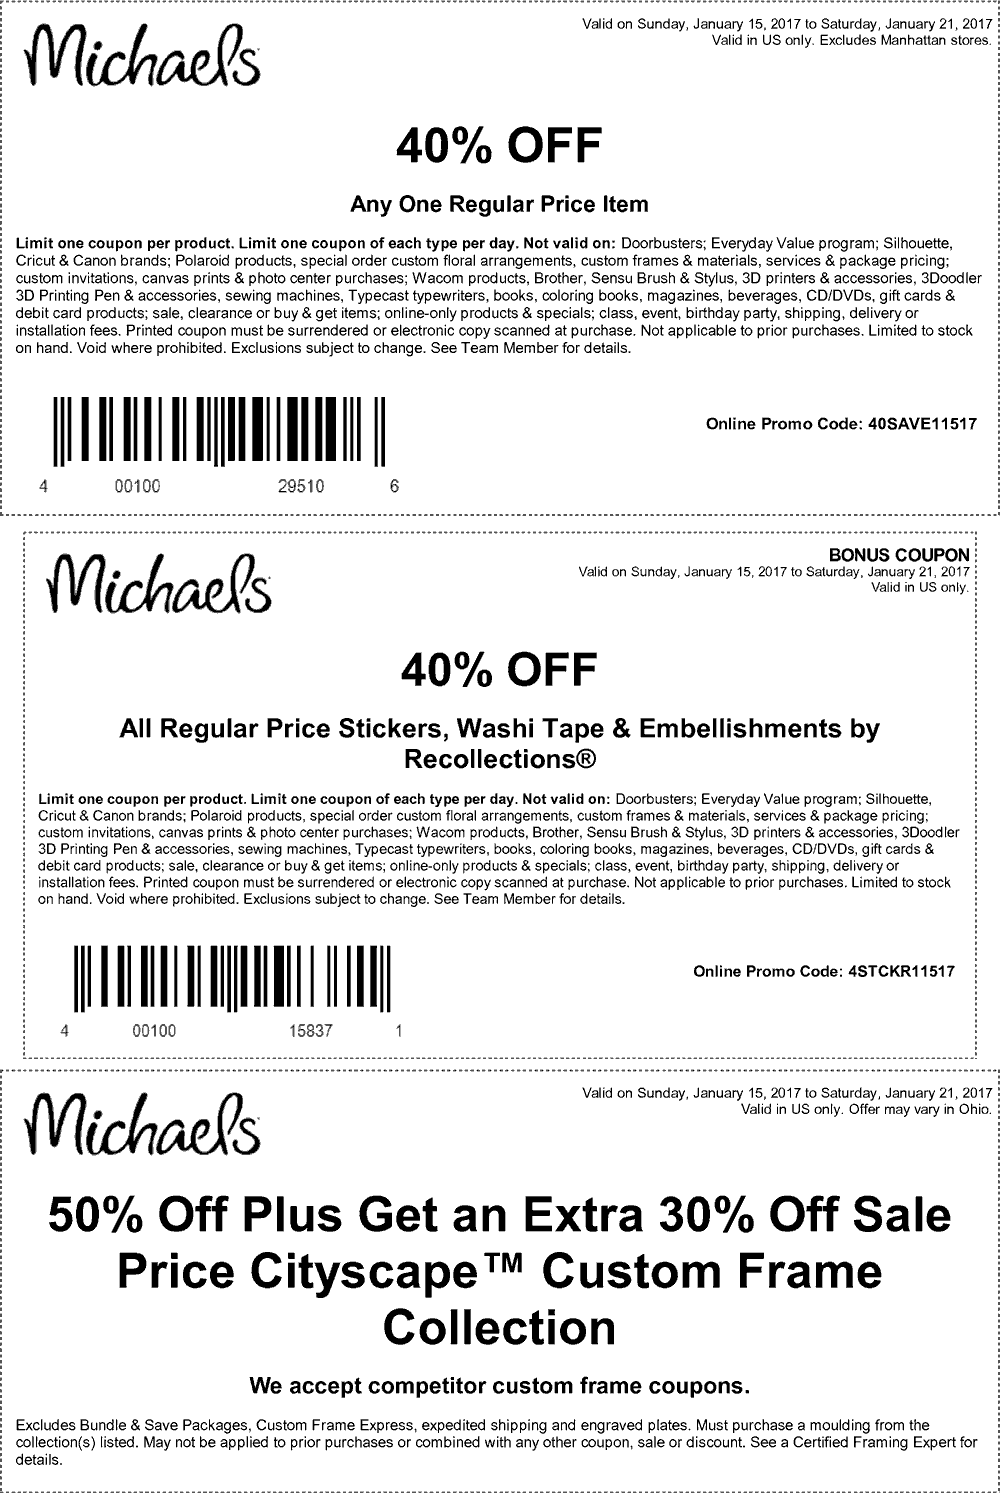 Michaels coupons 40 off a single item at Michaels, or